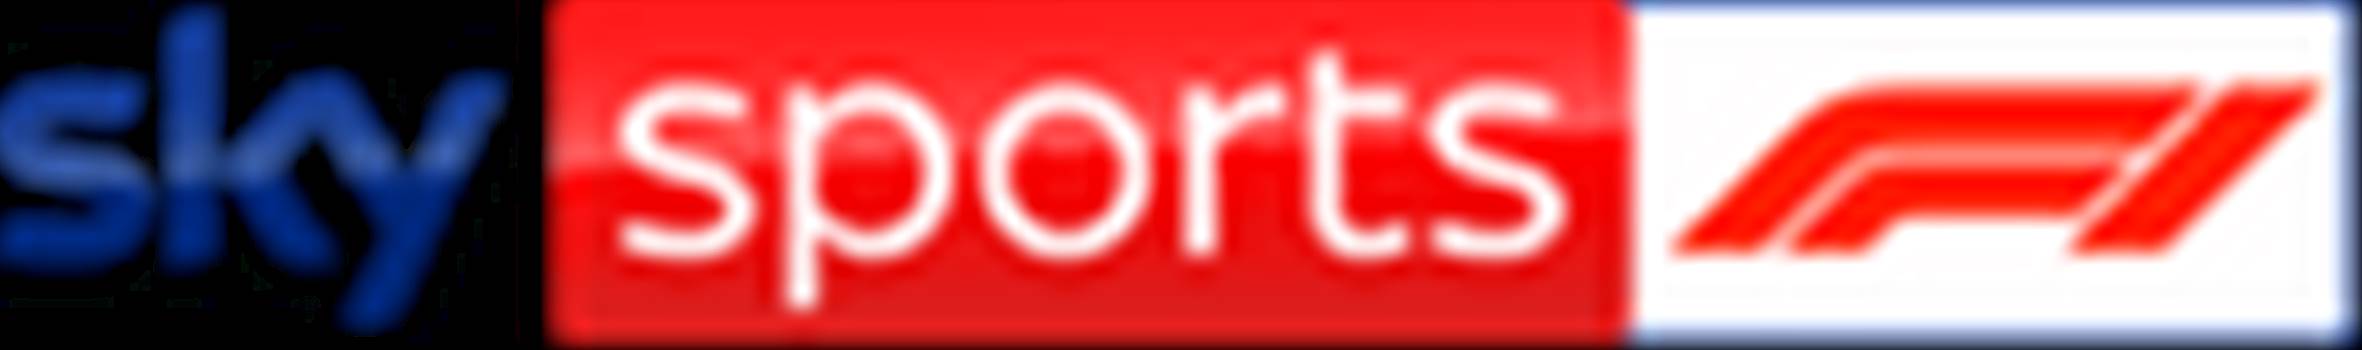 Sky_Sports_F1.png by tello